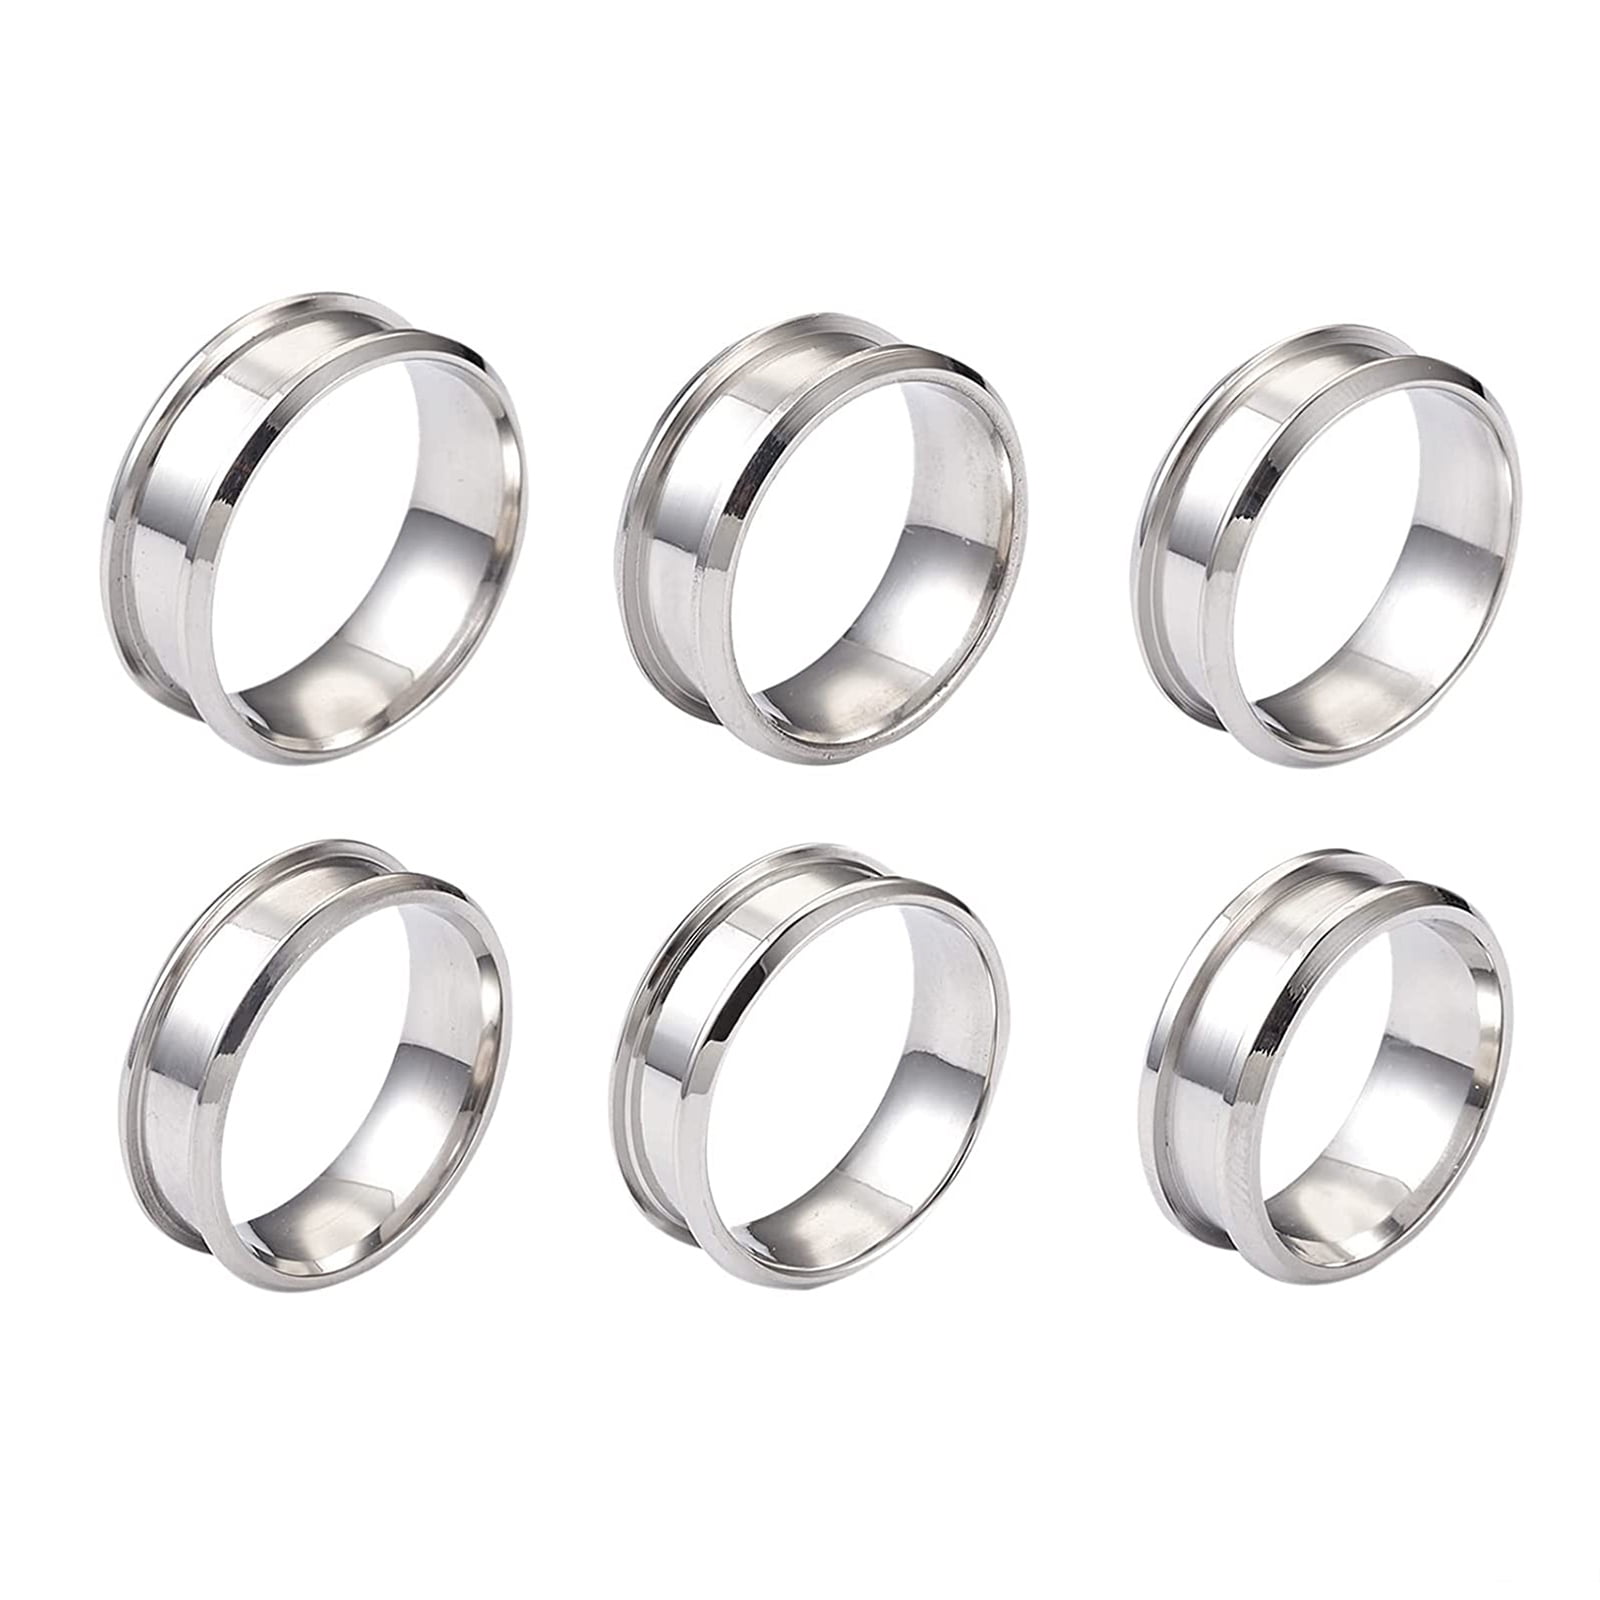 Ring Size Adjusters Set for Loosing Rings in 2 Styles, 12 Sizes